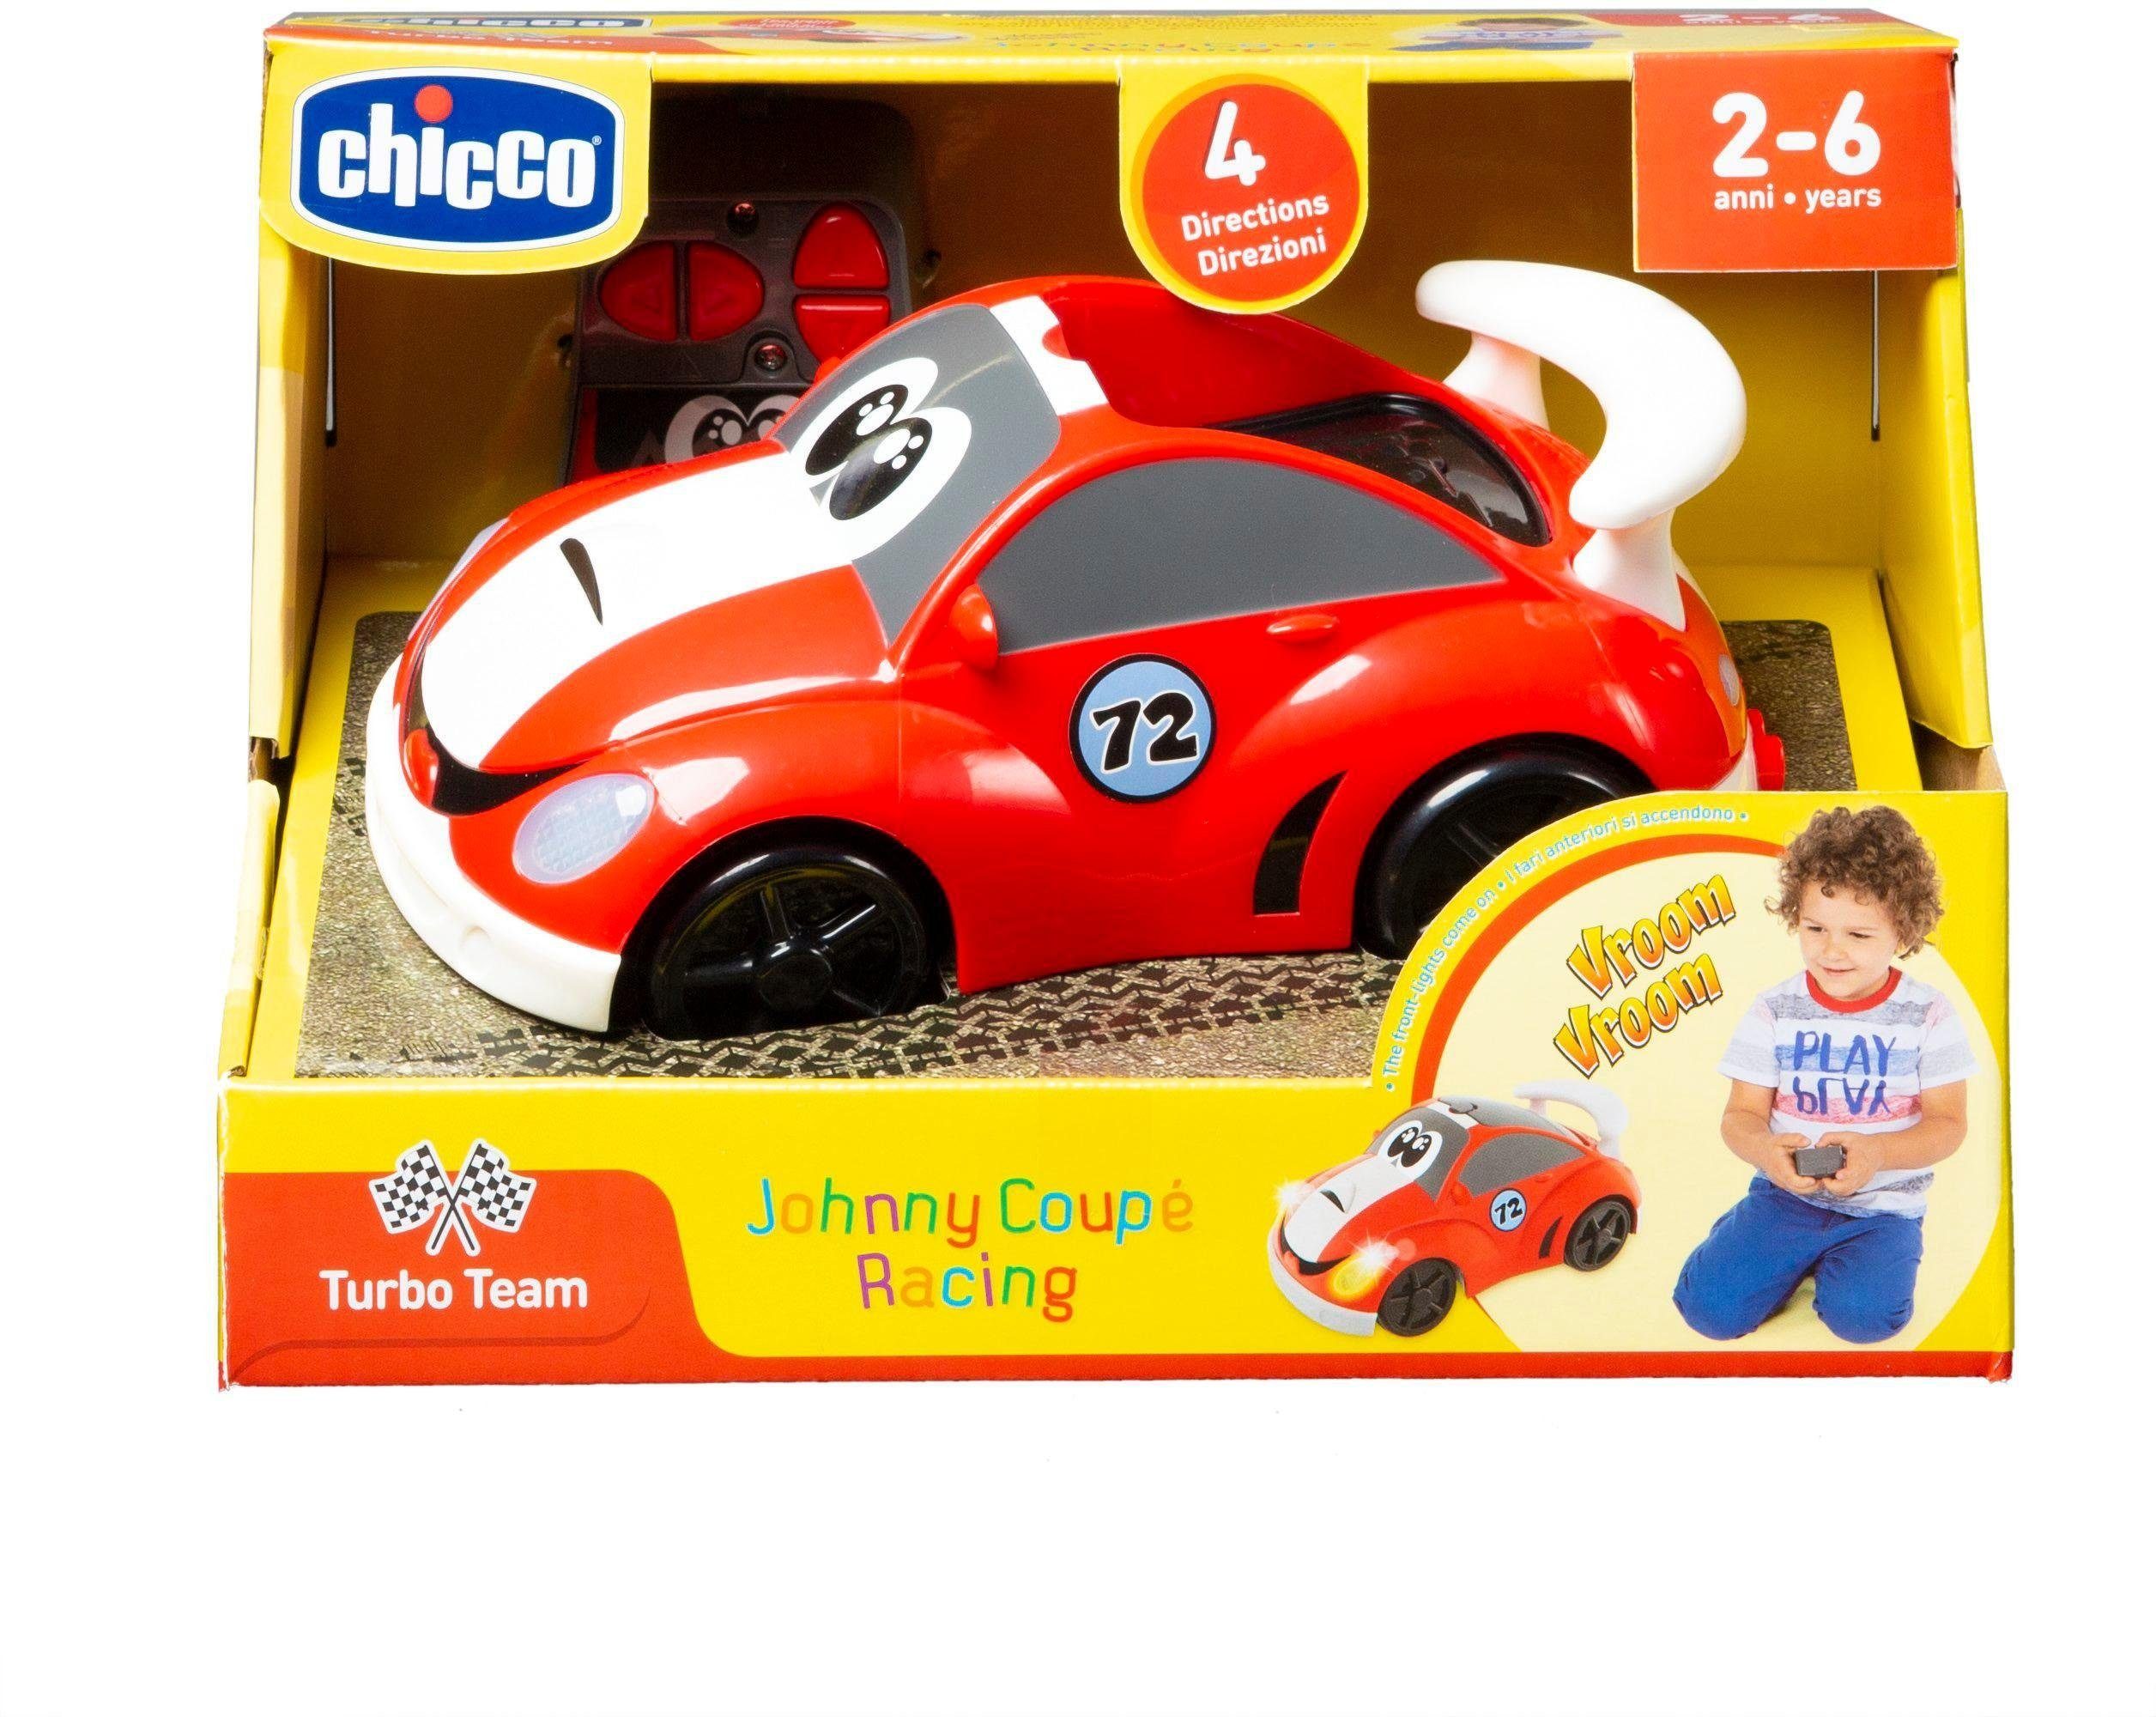 Chicco RC-Auto Johnny Coupé Racing, mit Licht, Ferngesteuertes Auto »Johnny  Coupé Racing«